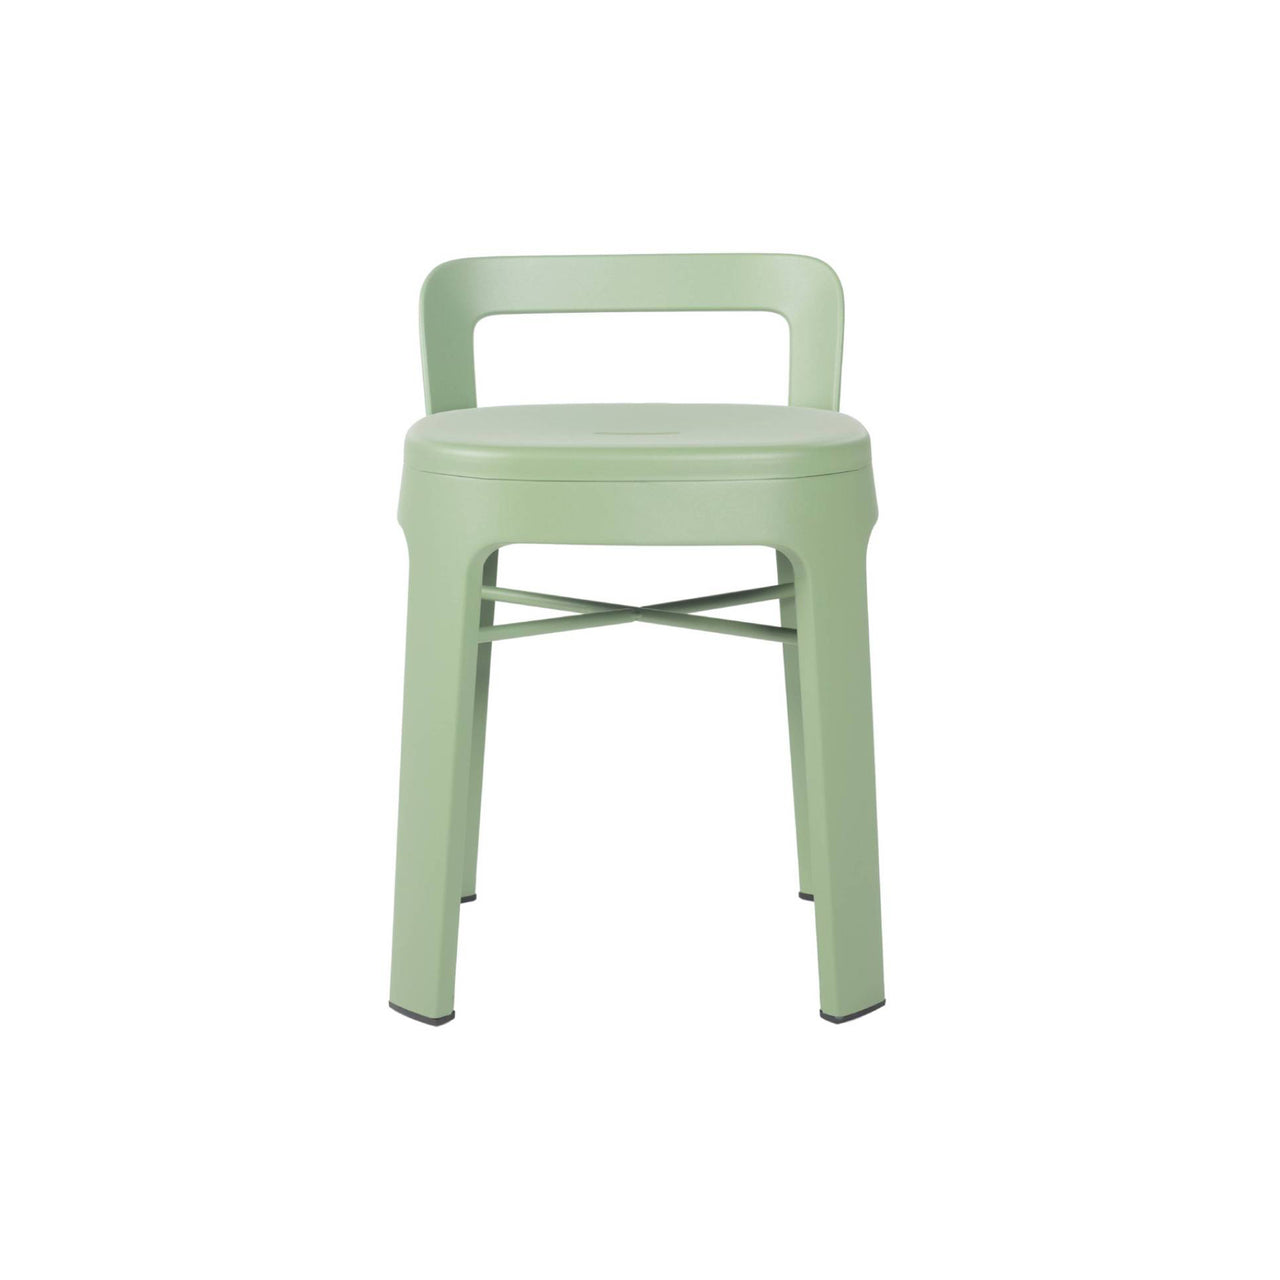 Ombra Stool with Backrest: Green